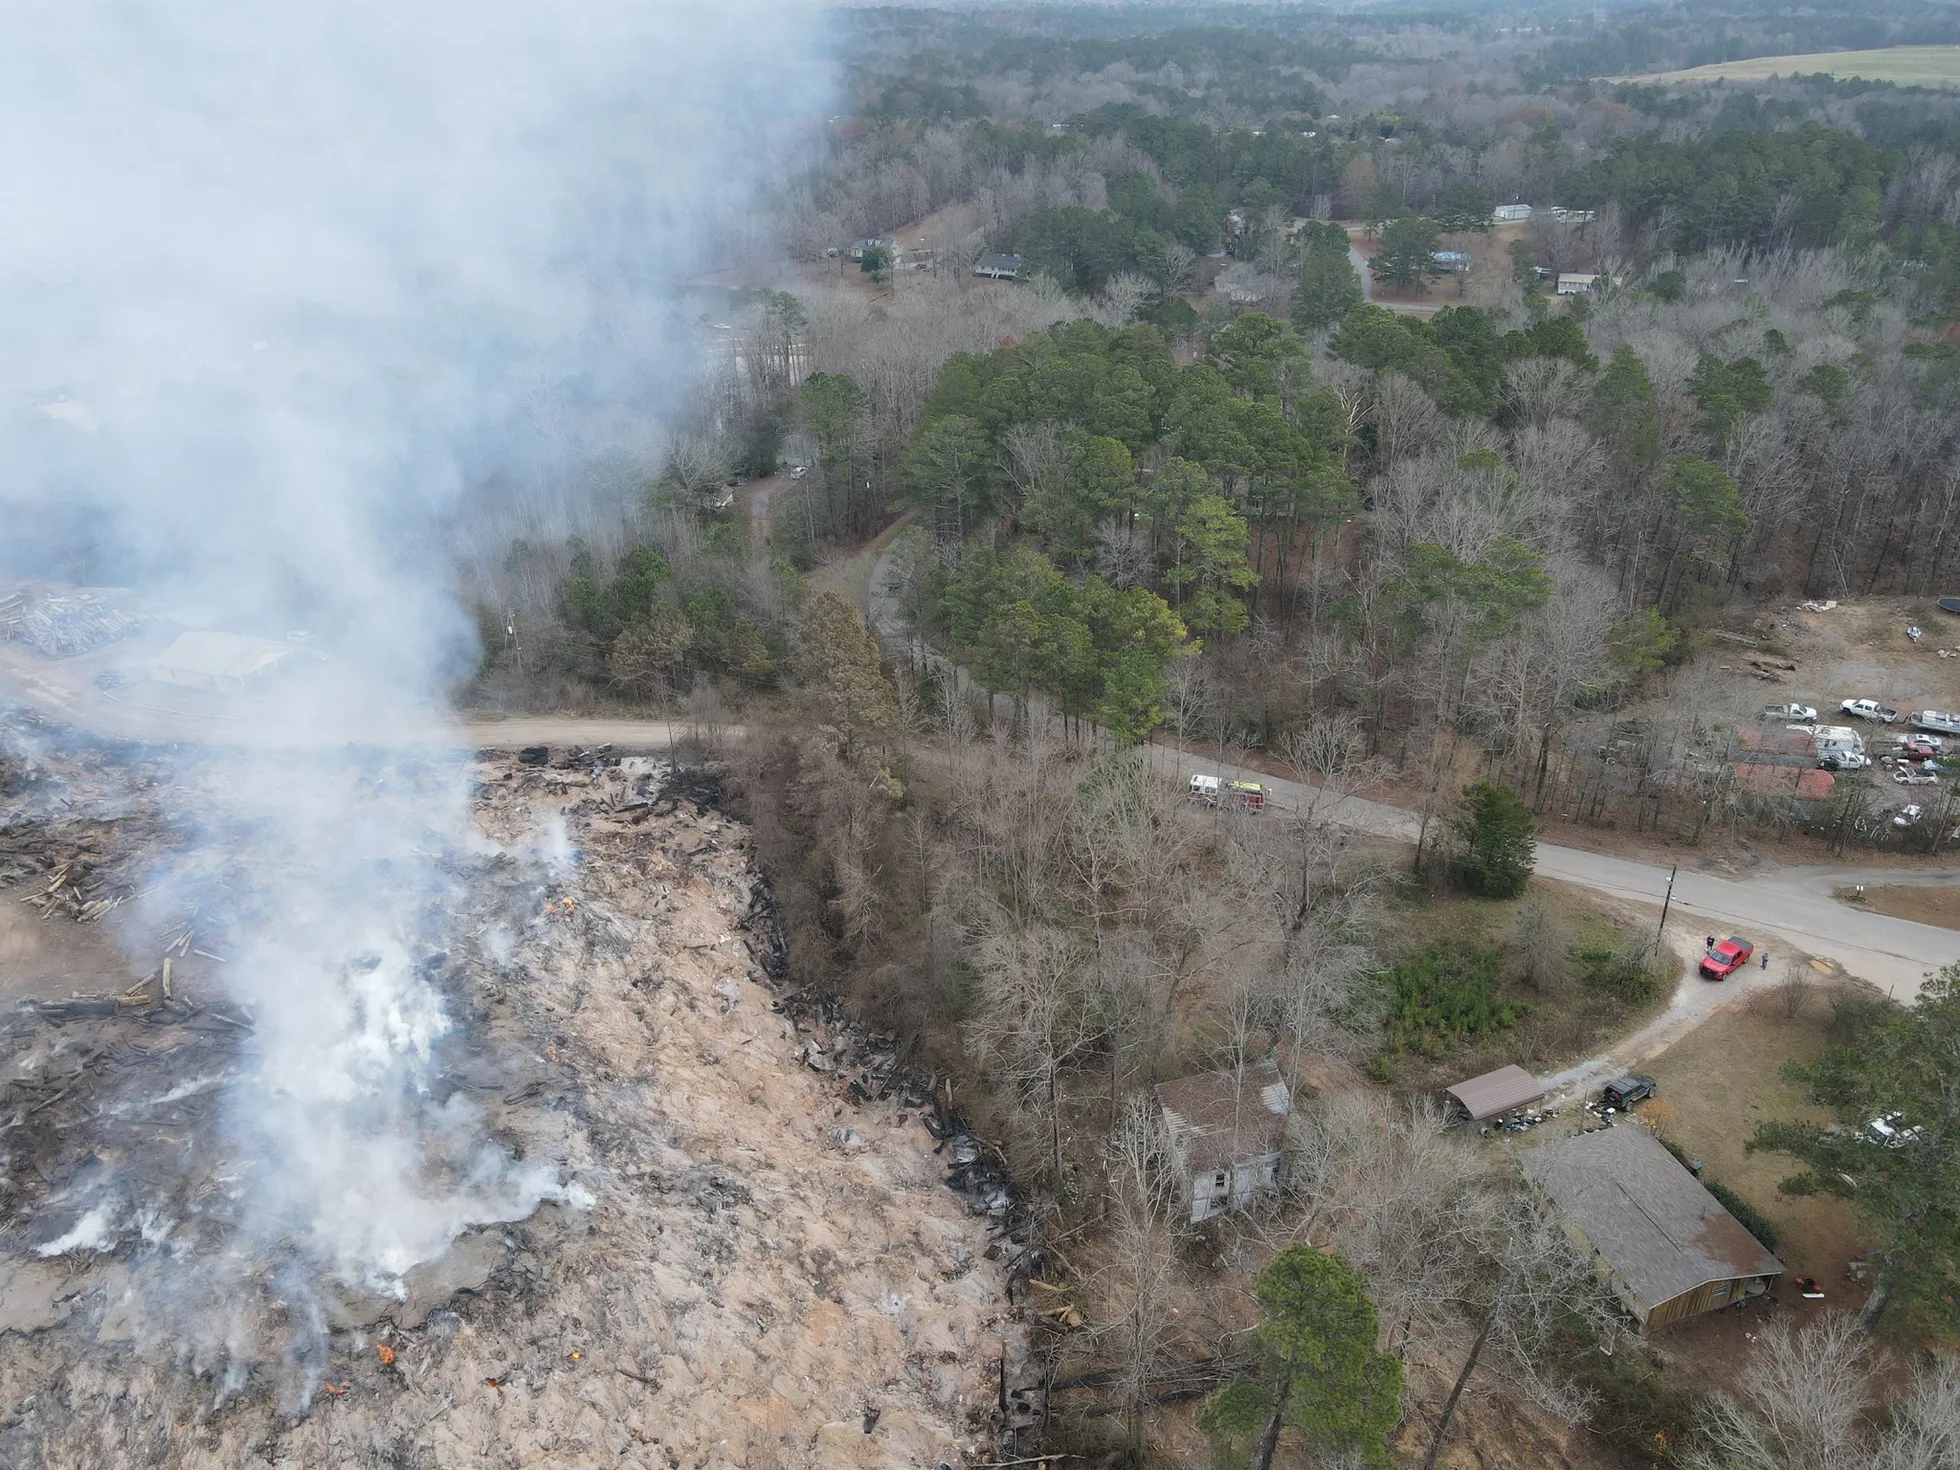 Landfills catch fire, briefly, all over America. Why did one in Alabama burn for months?